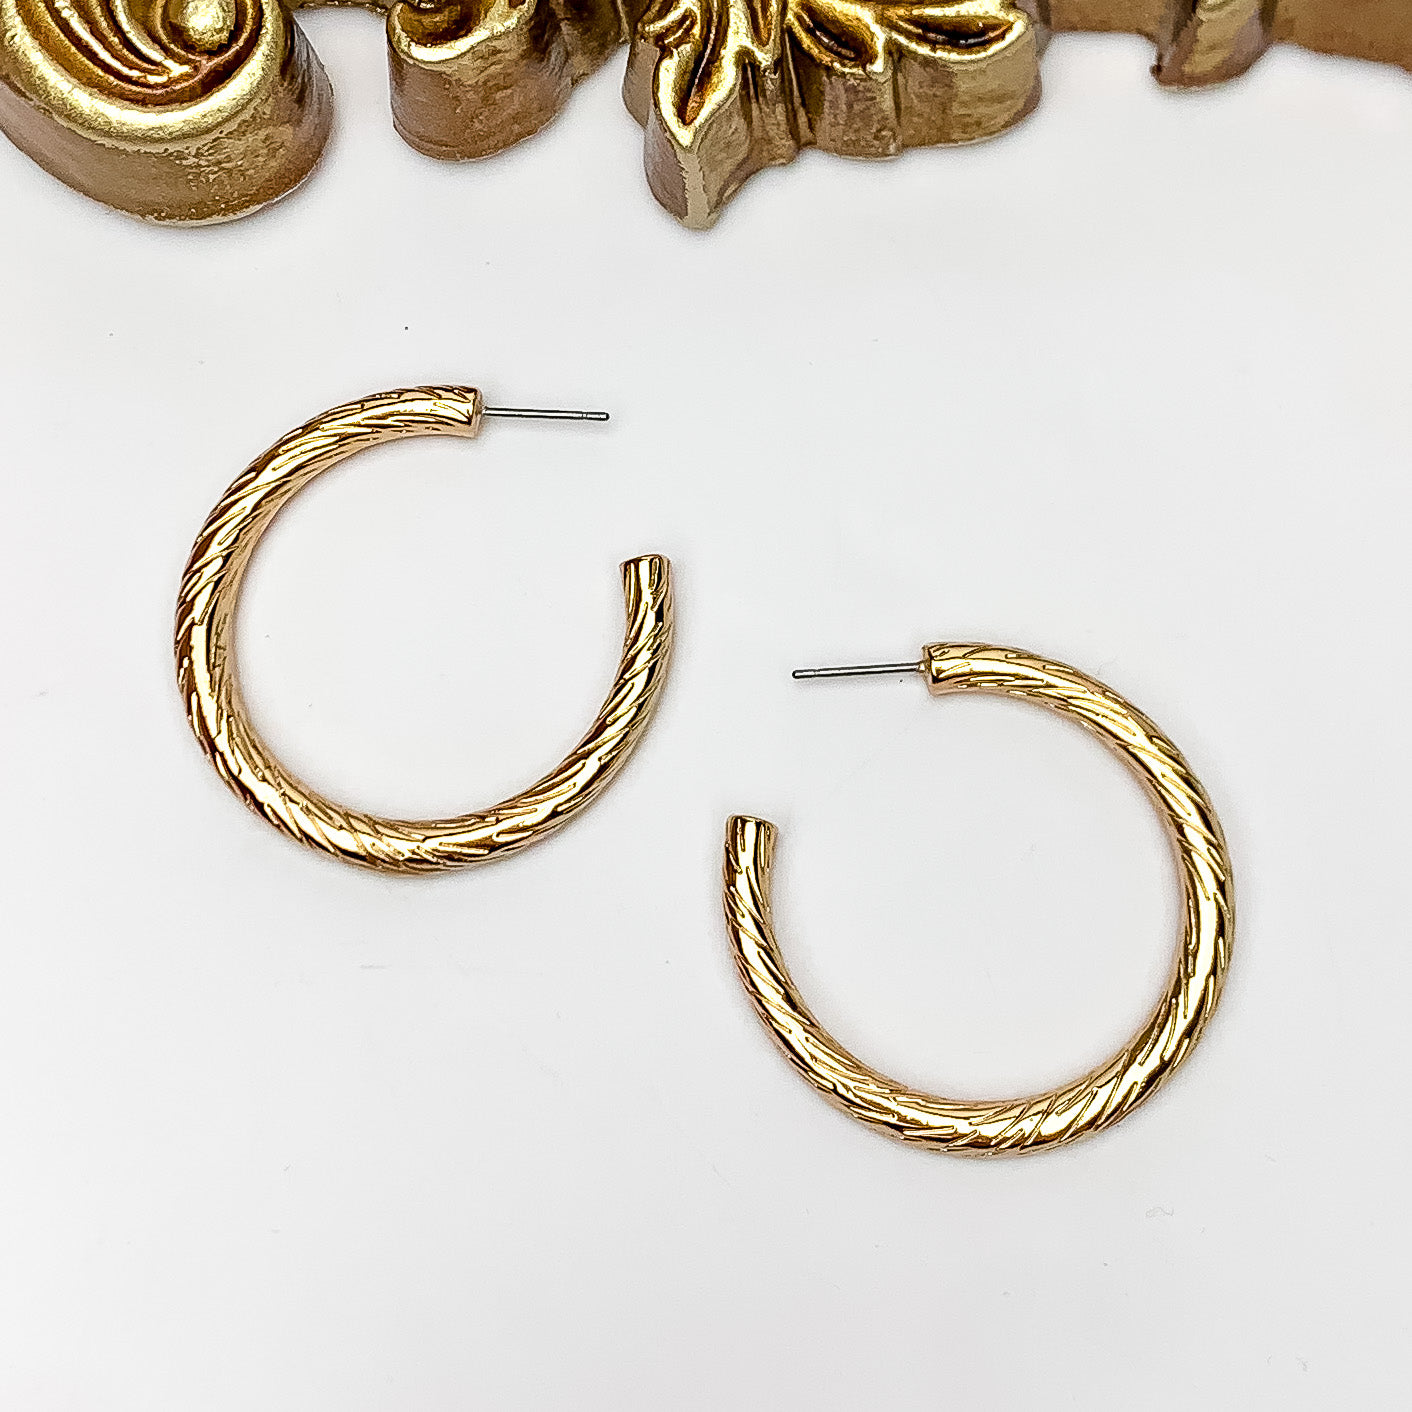 Gold Tone Large Twisted Hoop Earrings - Giddy Up Glamour Boutique